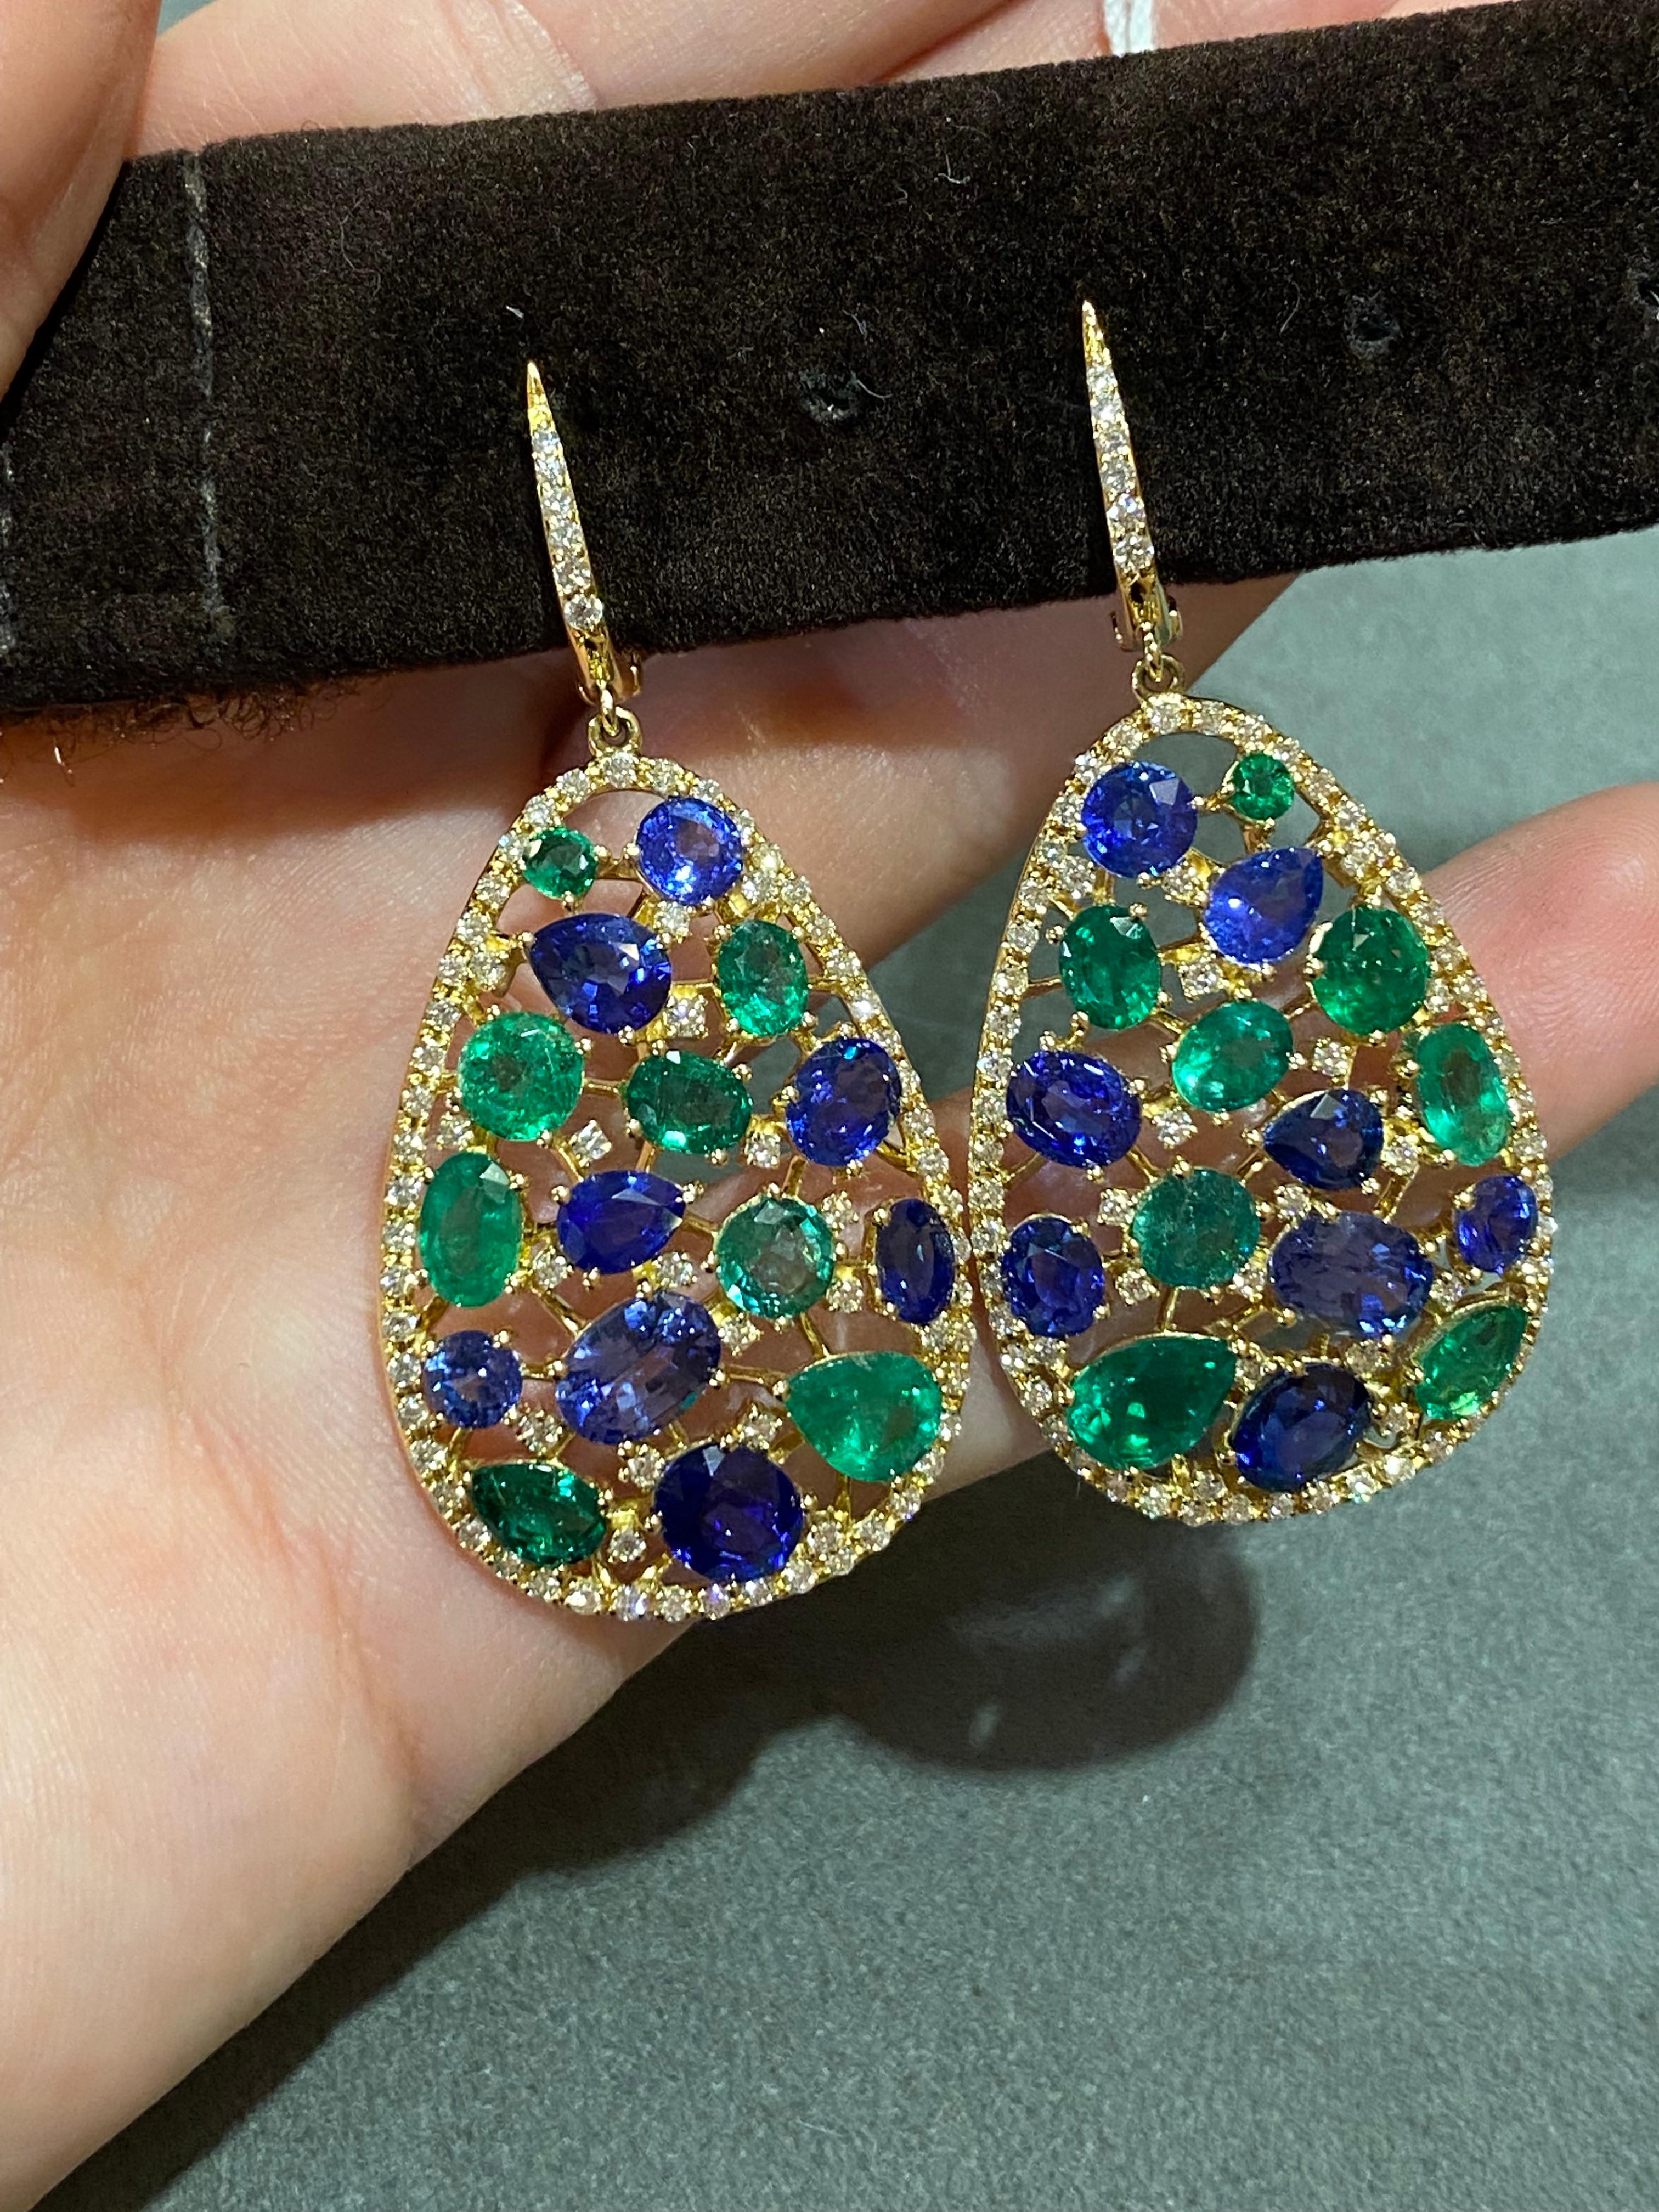 Earrings Yellow Gold 18K 

1.39 ct Diamonds
5.84 cts Emeralds
10.49 cts Sapphires
Weight 15,91 grams

With a heritage of ancient fine Swiss jewelry traditions, NATKINA is a Geneva-based jewelry brand that creates modern jewelry masterpieces suitable